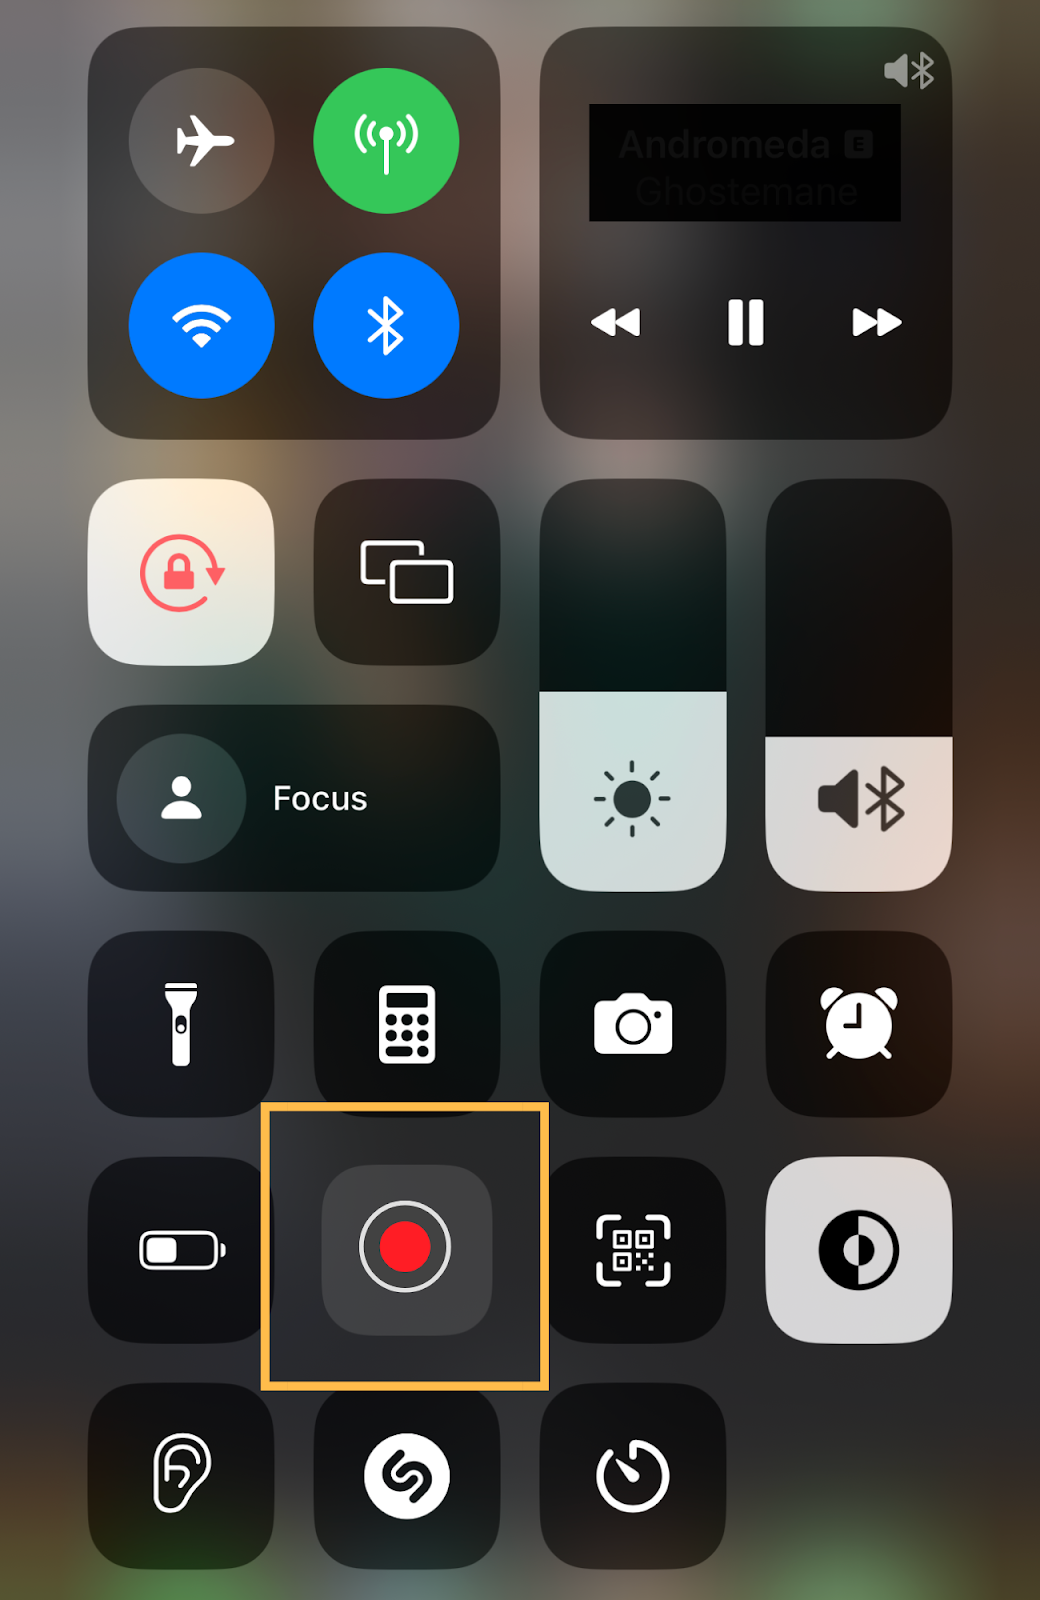 How to record screen on iPhone and iPad: Step 1 Swipe down from the top of the screen